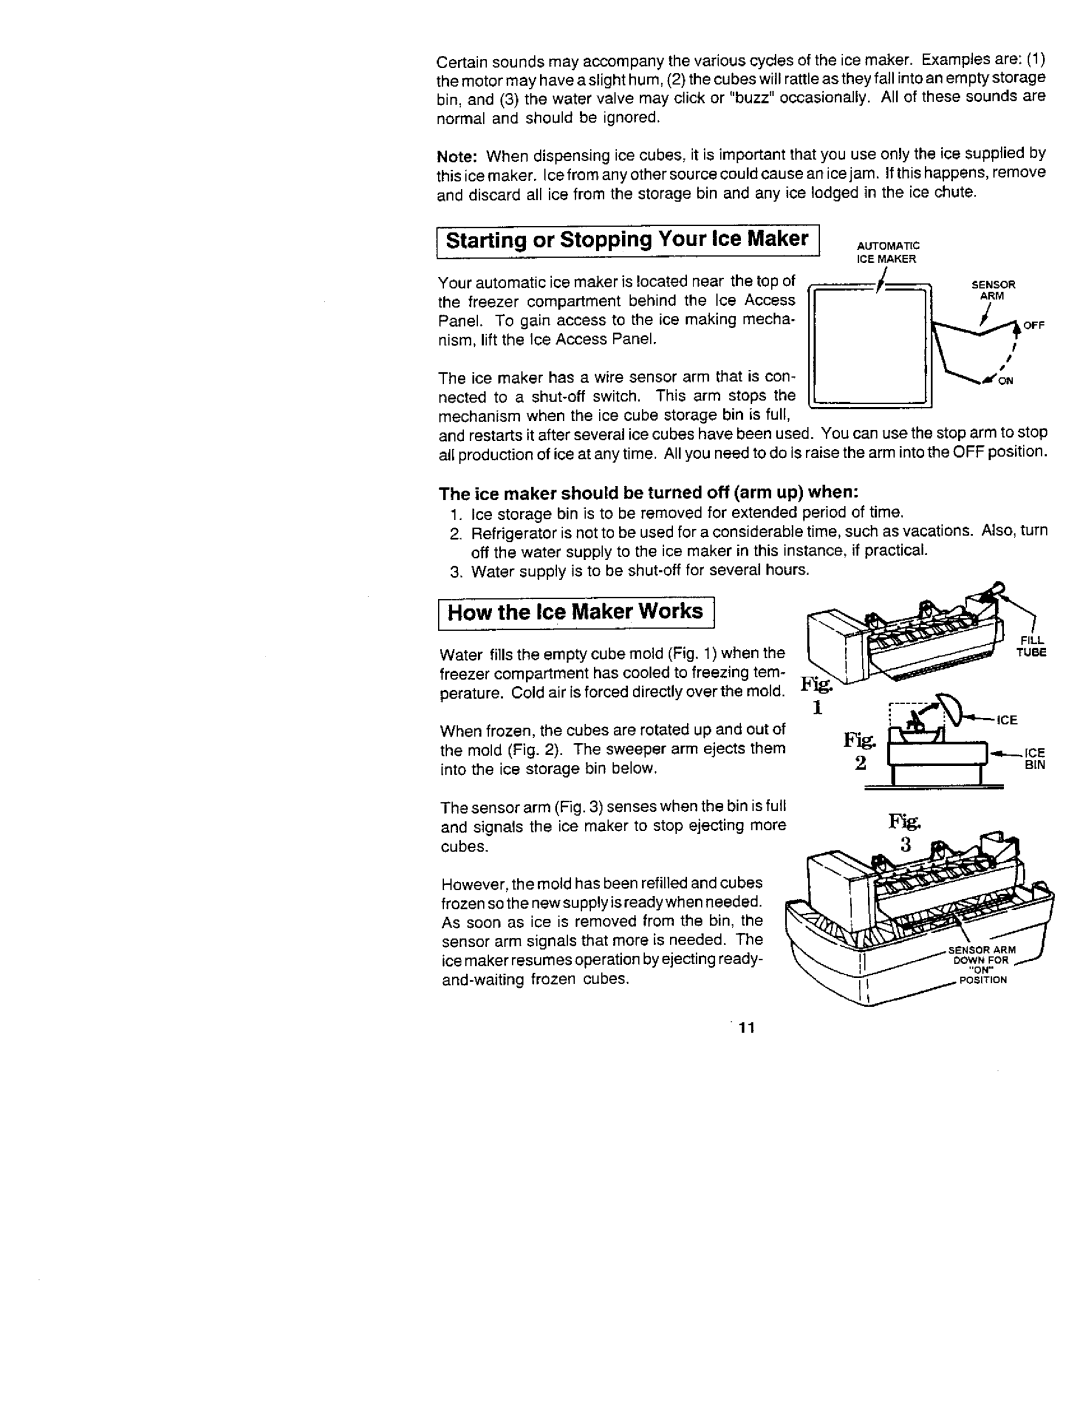 Jenn-Air JRSD209, JRS229, JRS207, JRSDE229, JRSF12250 manual I Starting or Stopping Your Ice Maker, I How the Ice Maker Works 